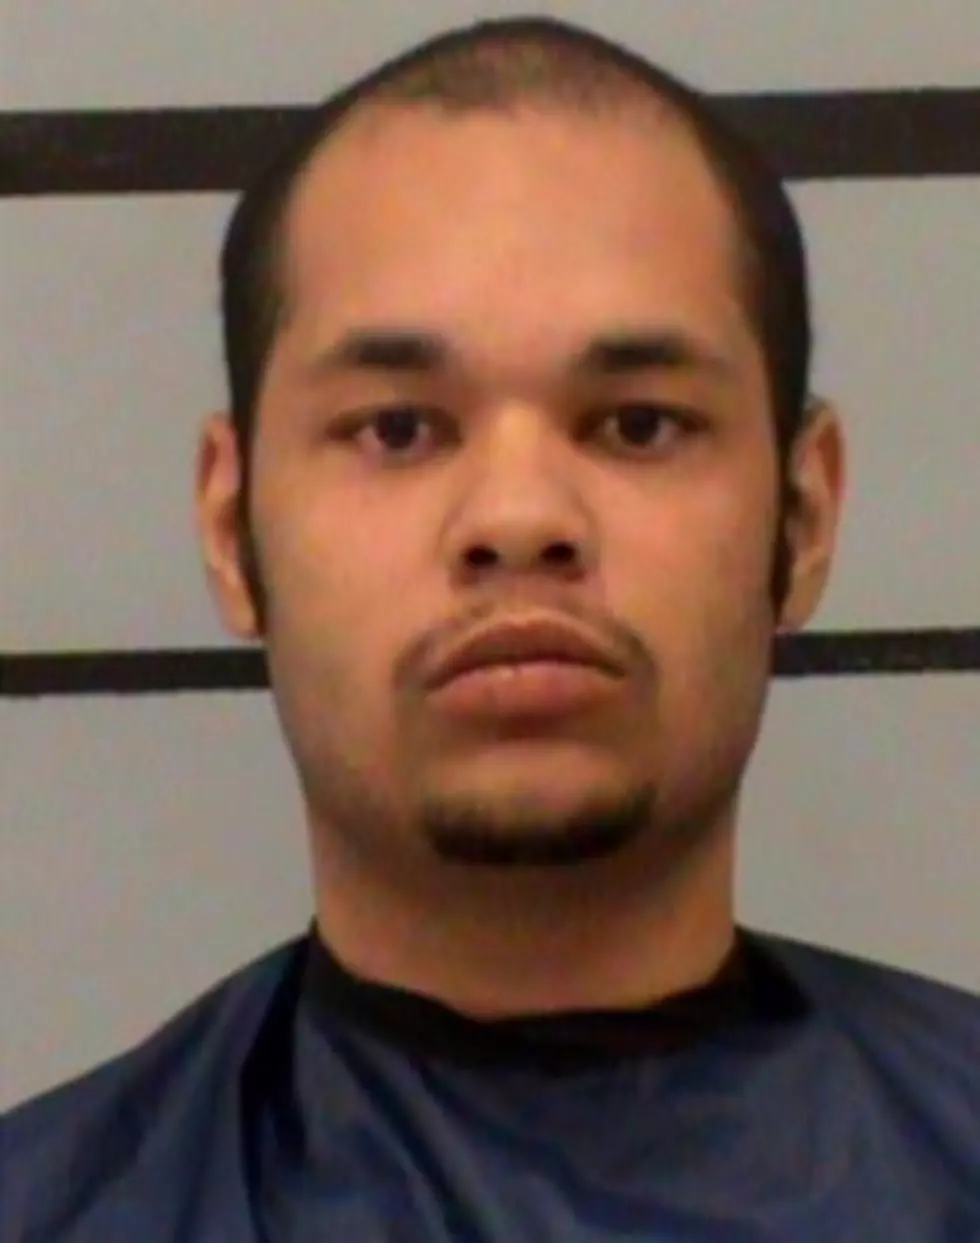 Lubbock Man Indicted for Burning Baby’s Foot With Scalding Water